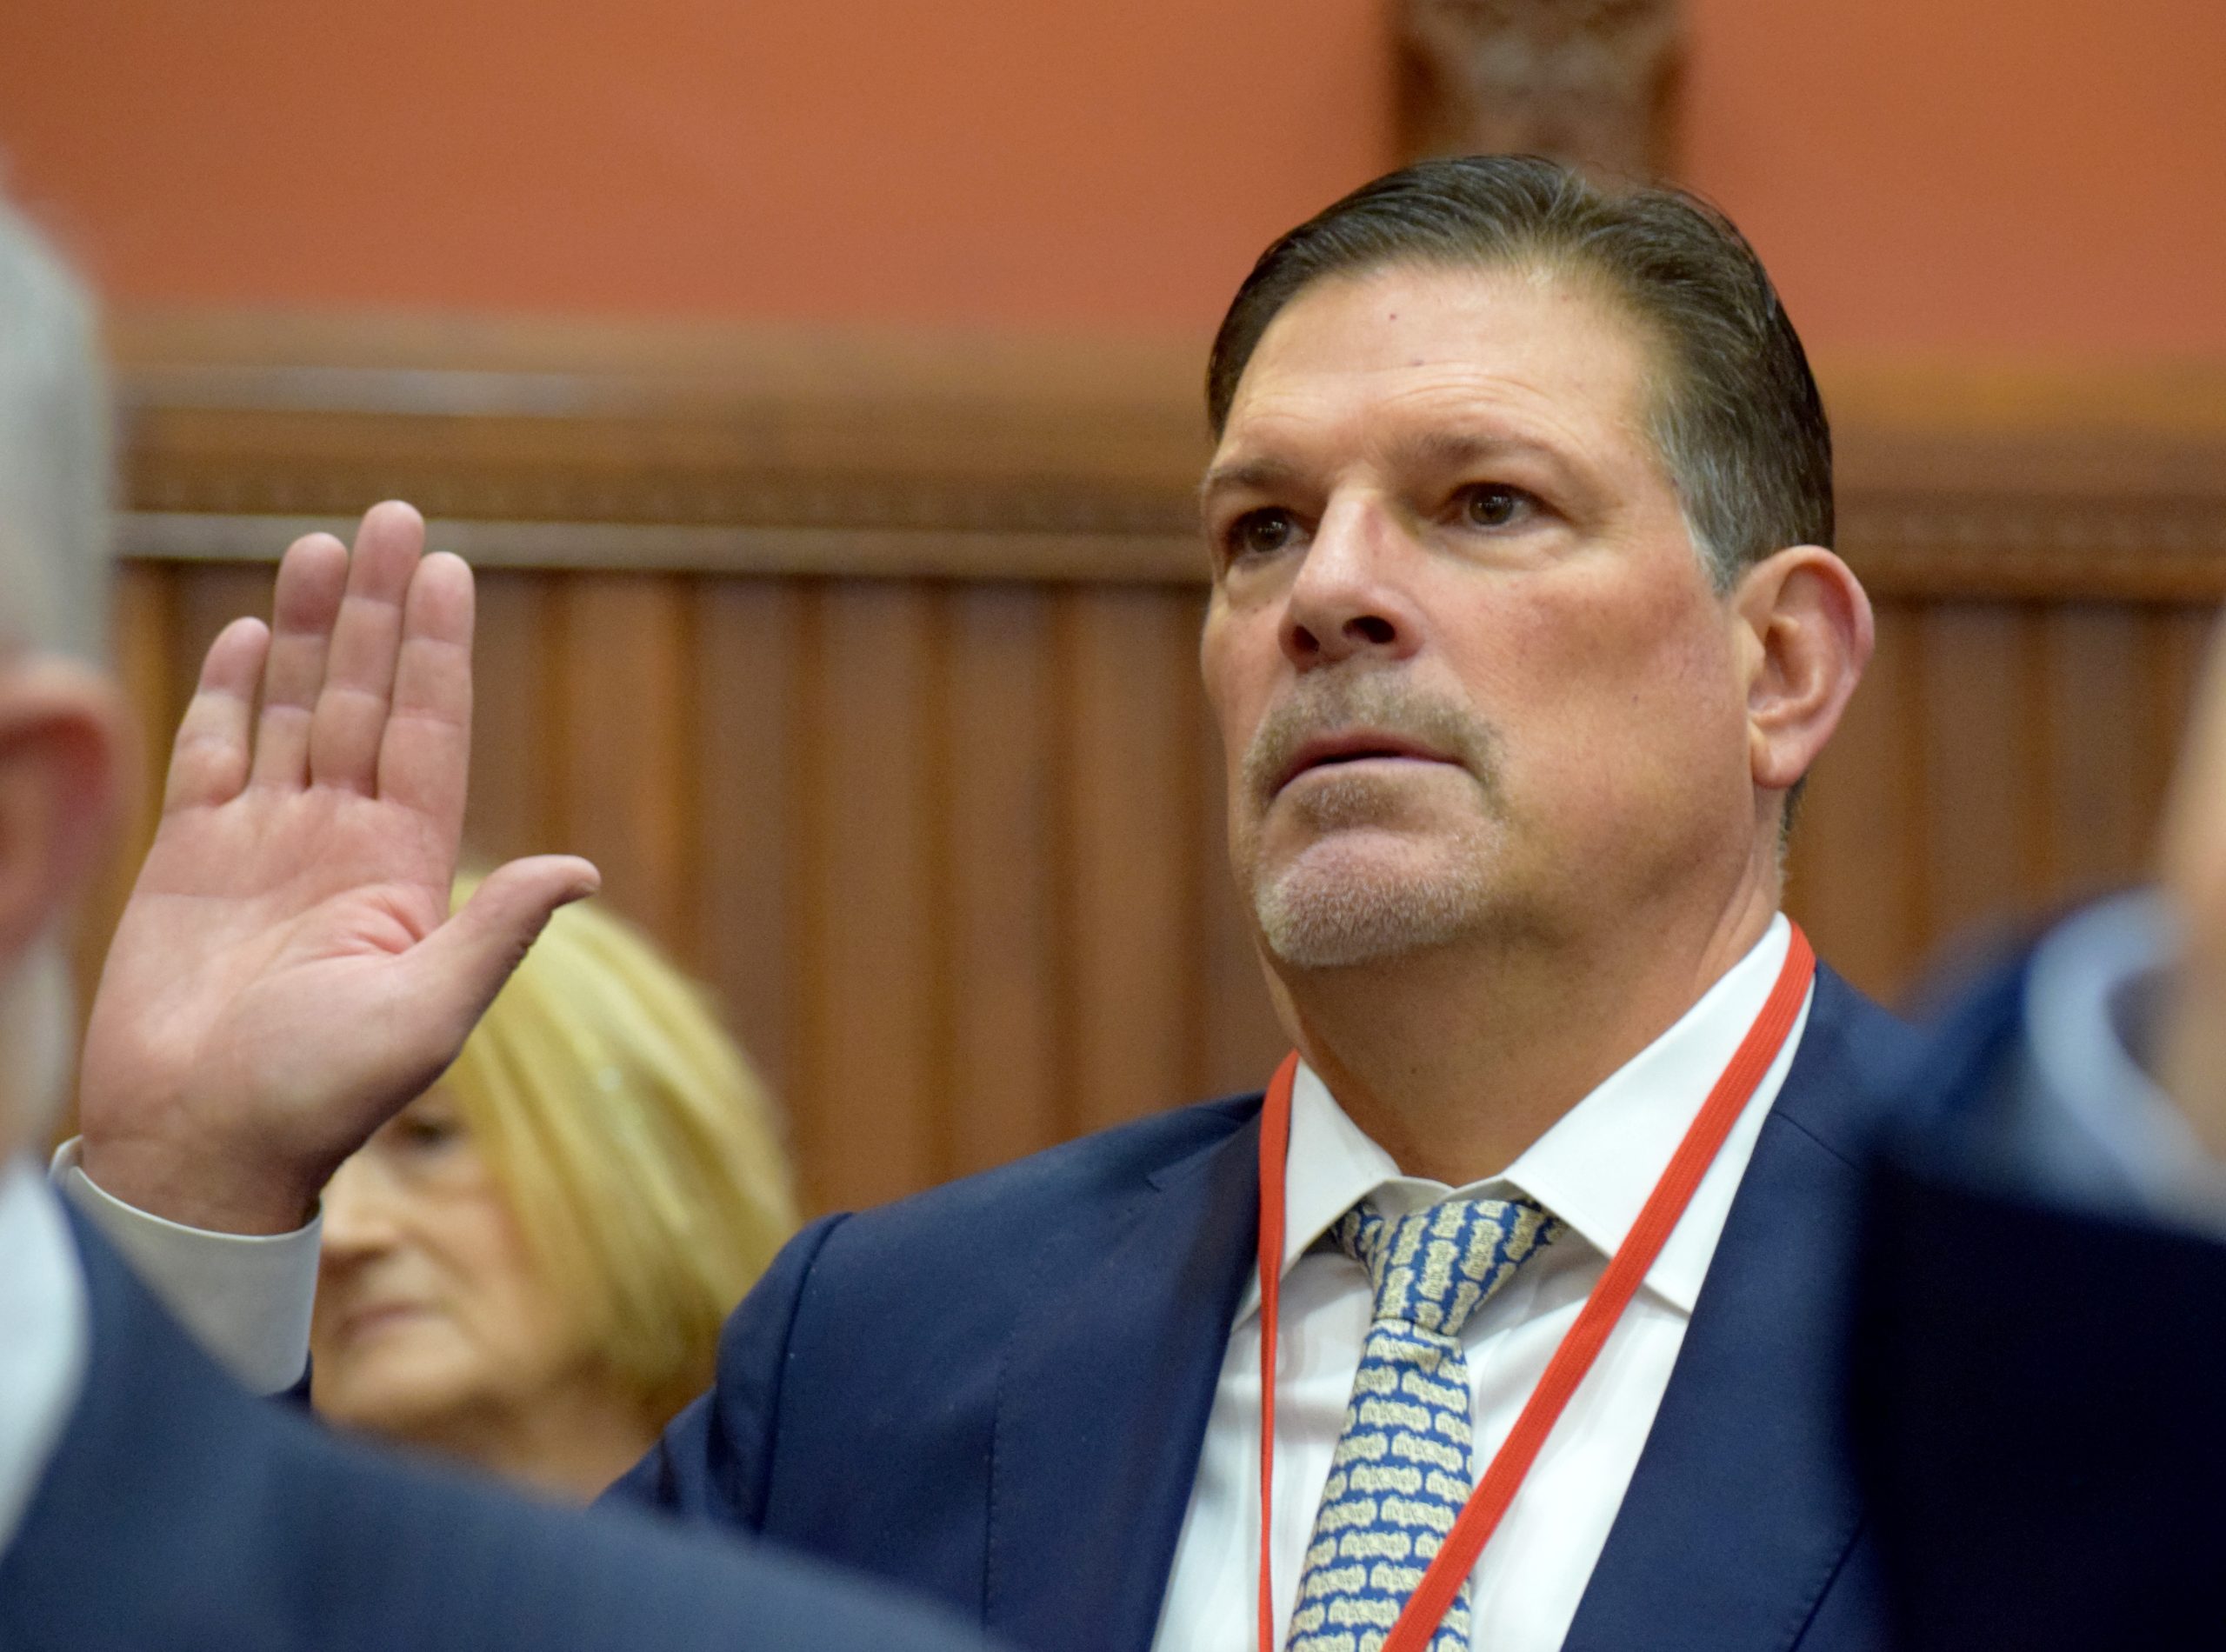 rep-o-dea-takes-oath-of-office-to-begin-sixth-term-in-connecticut